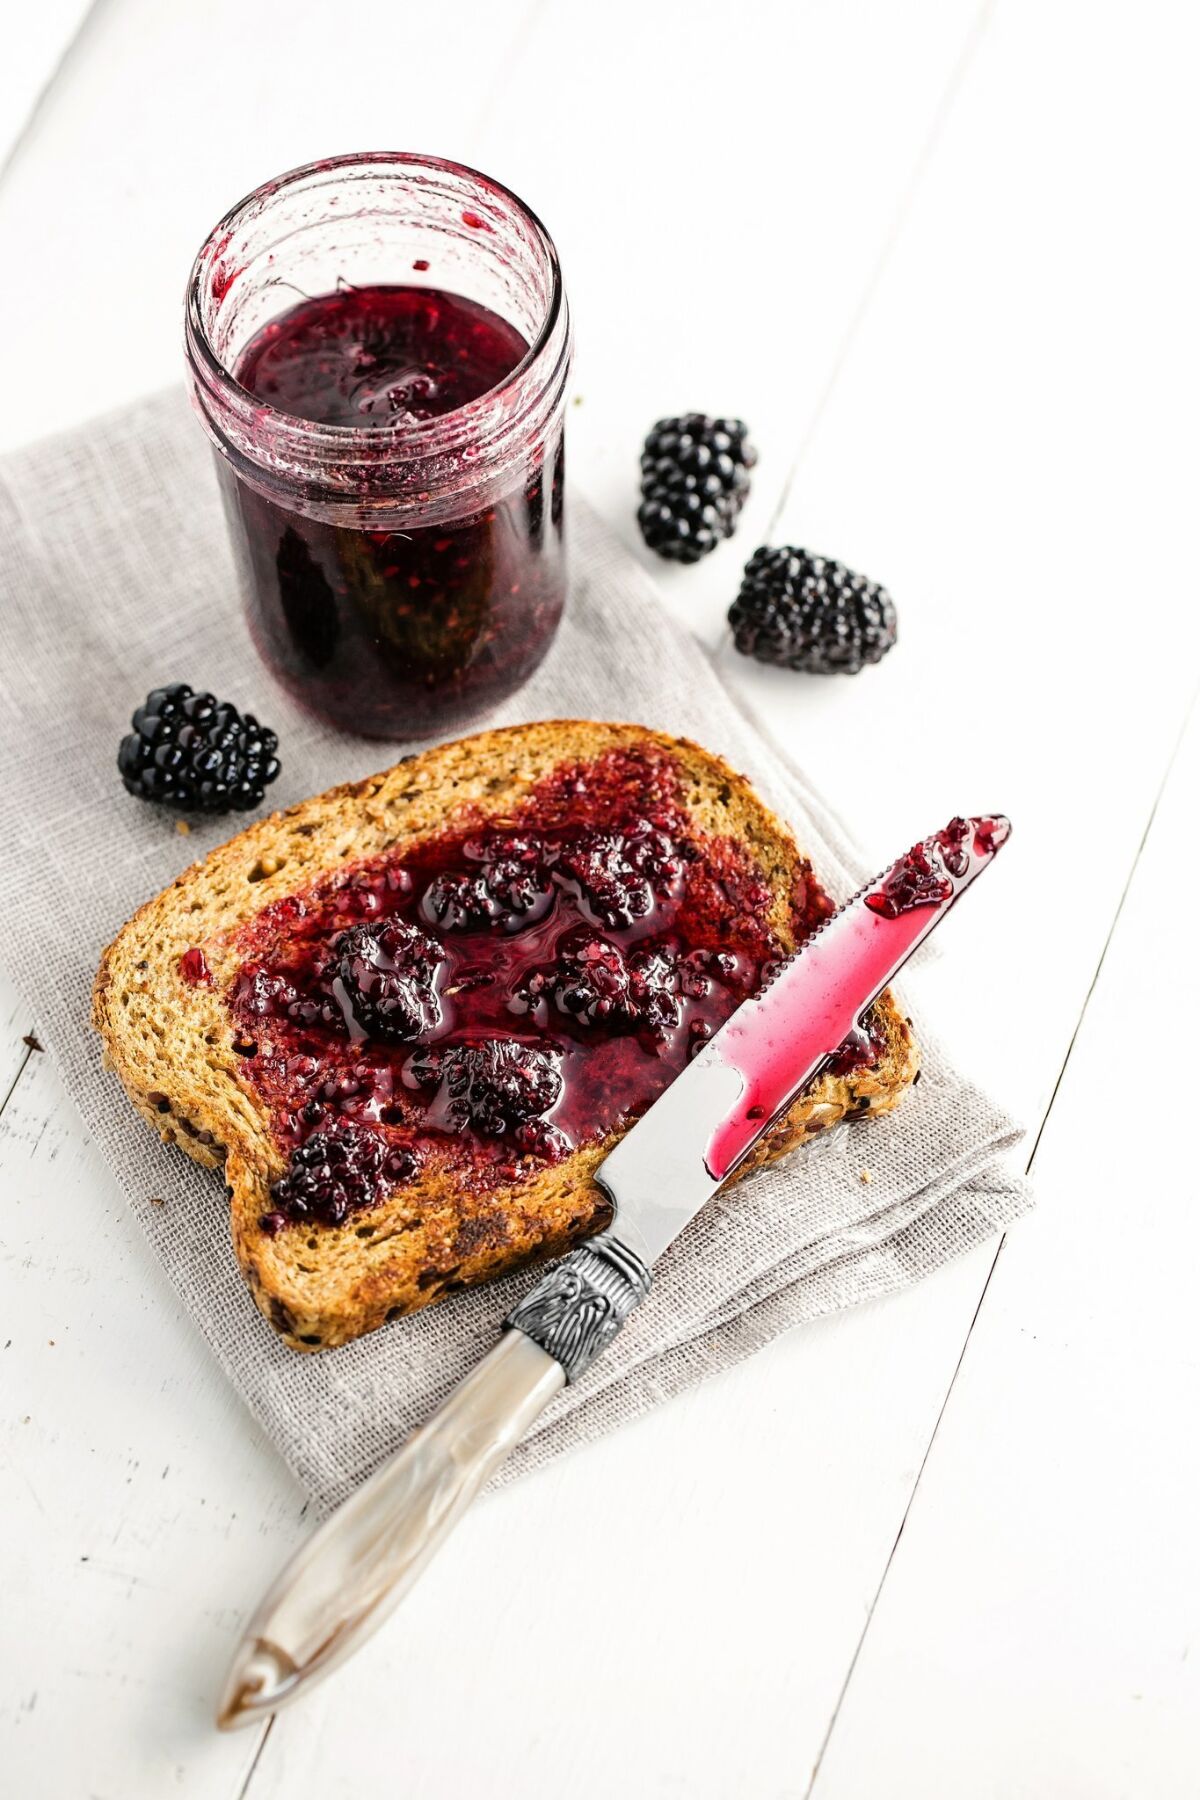 For food cover story about jam making. This is Blackberry and Bay Leaf Jam. Styled and photographed by Anita L. Arambula U-T Anita L.Arambula